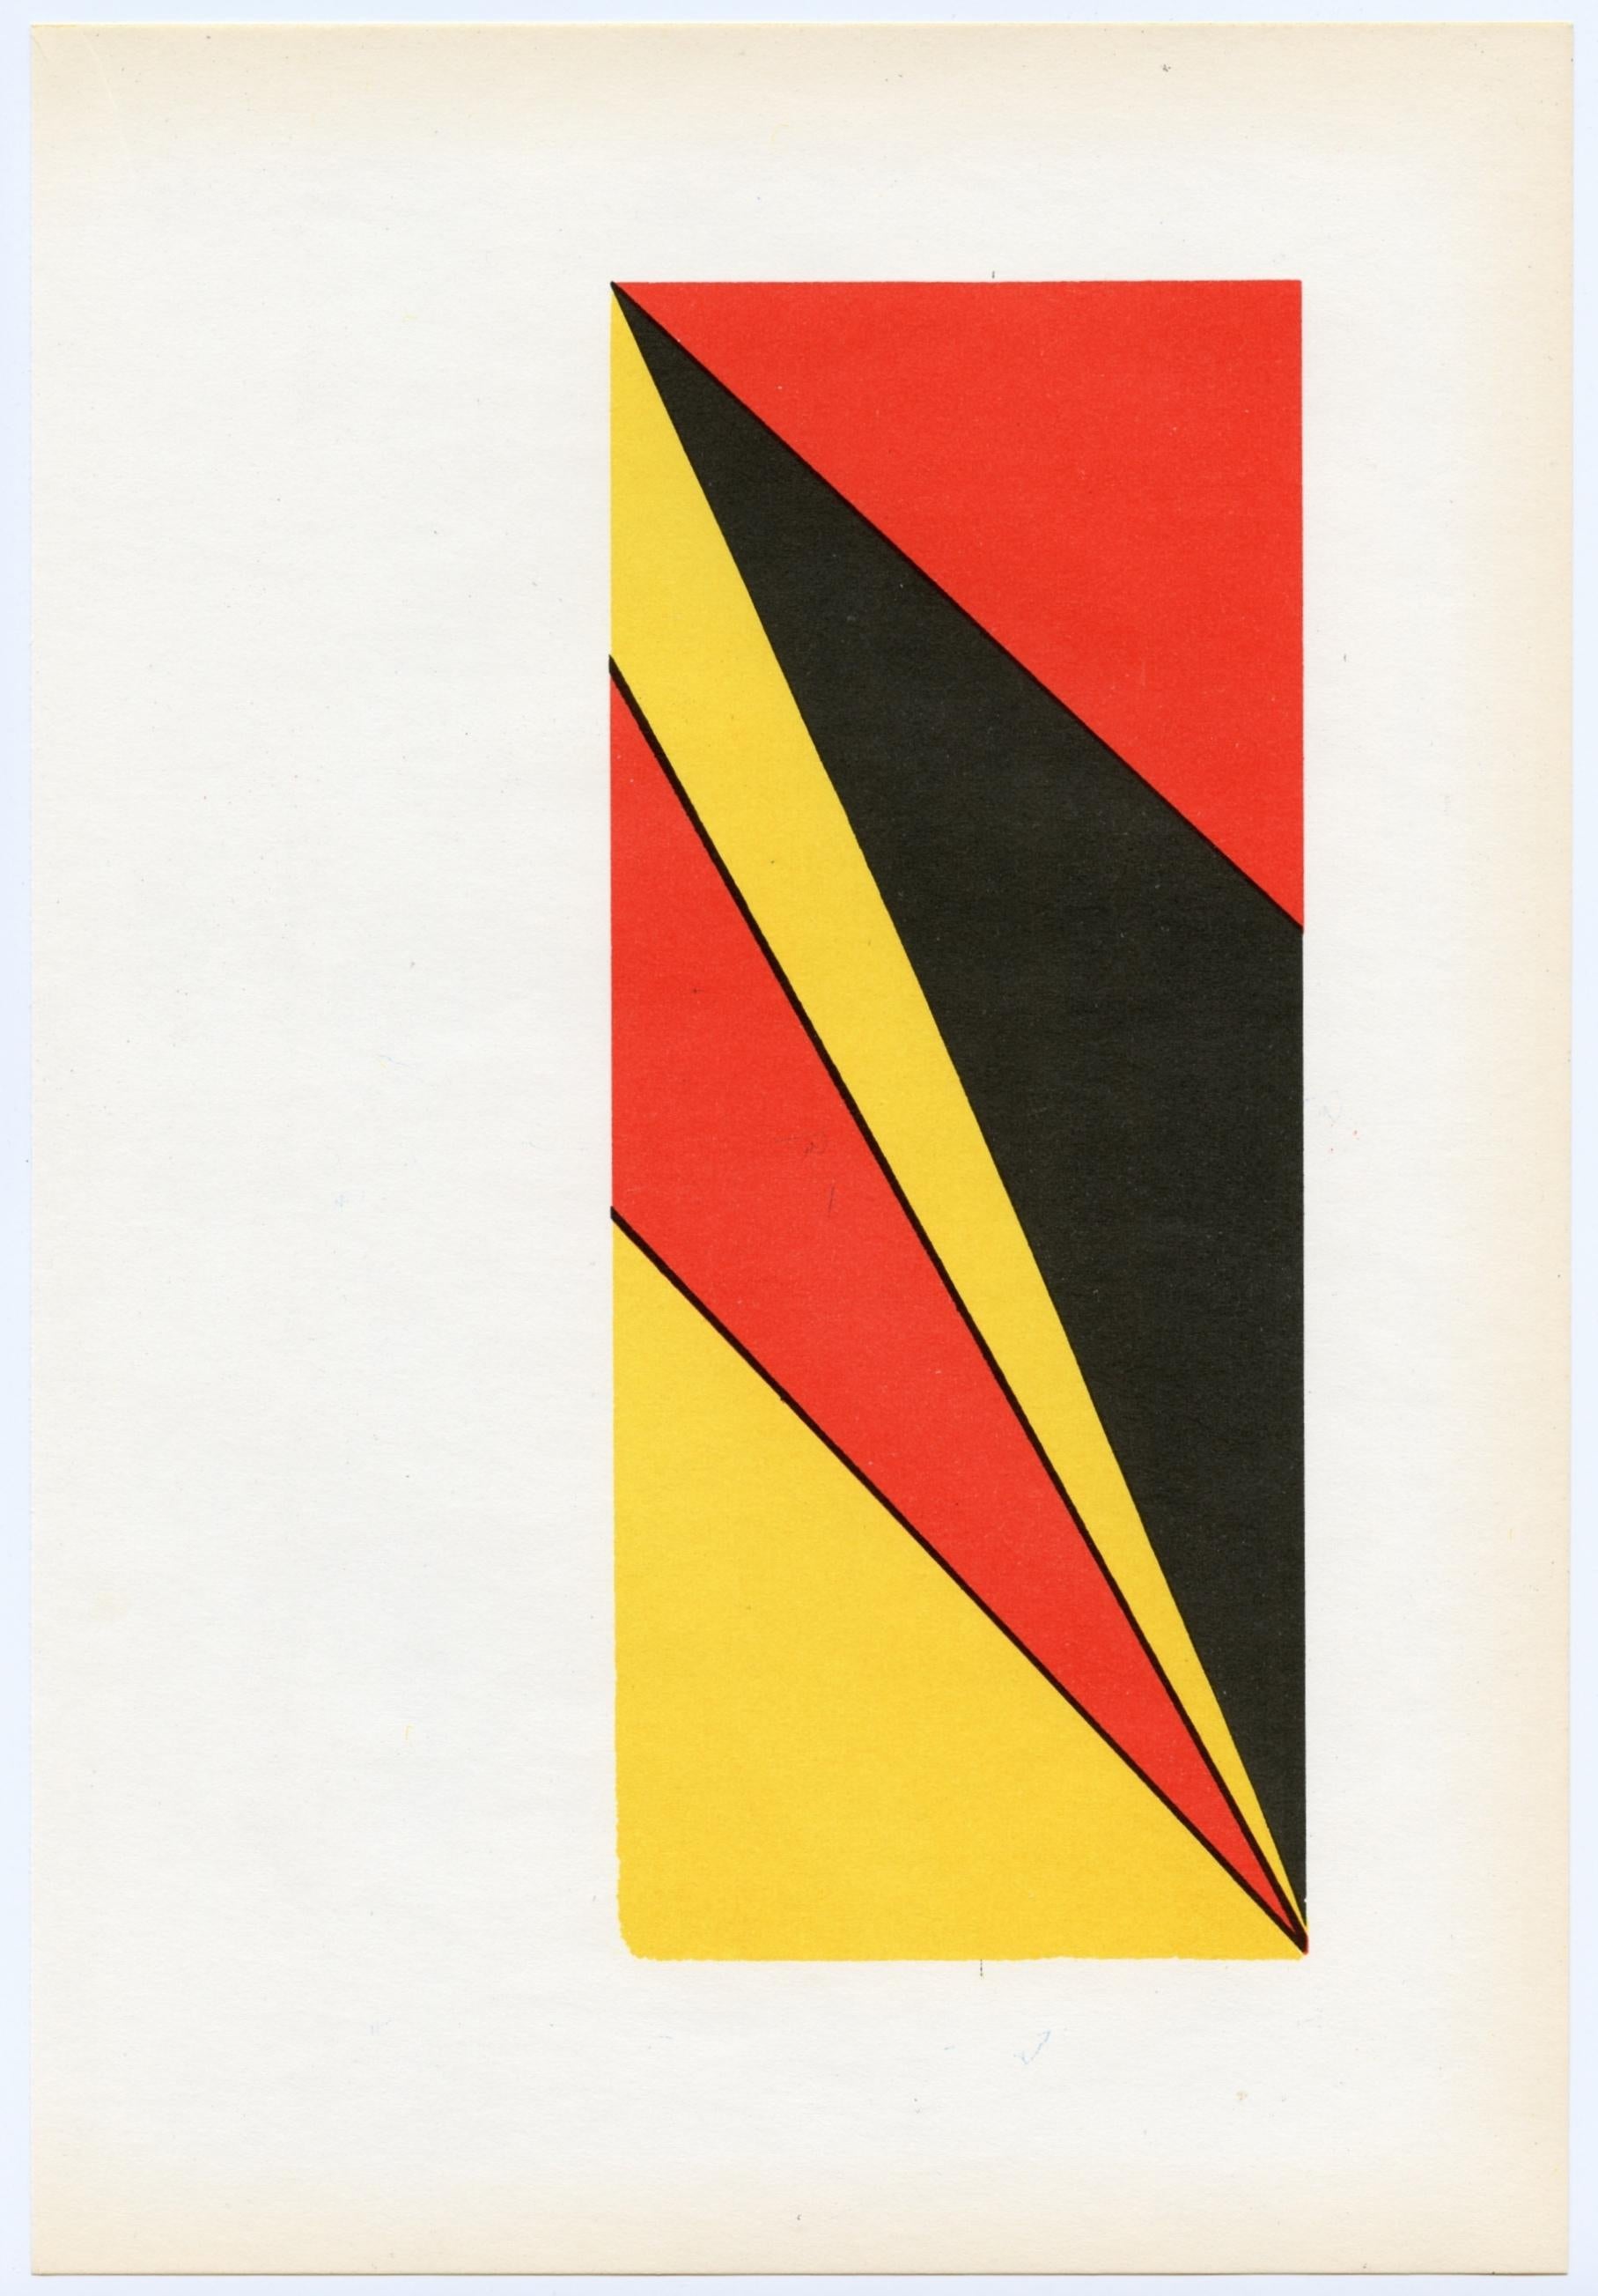 Medium: lithograph (after Olle Baertling). Printed in 1956 on thin wove paper and published in Stockholm for a Swedish survey of Concrete Art. Image size: 8 x 3 1/4 inches (202 x 83 mm). Sheet size: 10 1/2 x 7 1/4 inches (270 x 185 mm). Not signed.